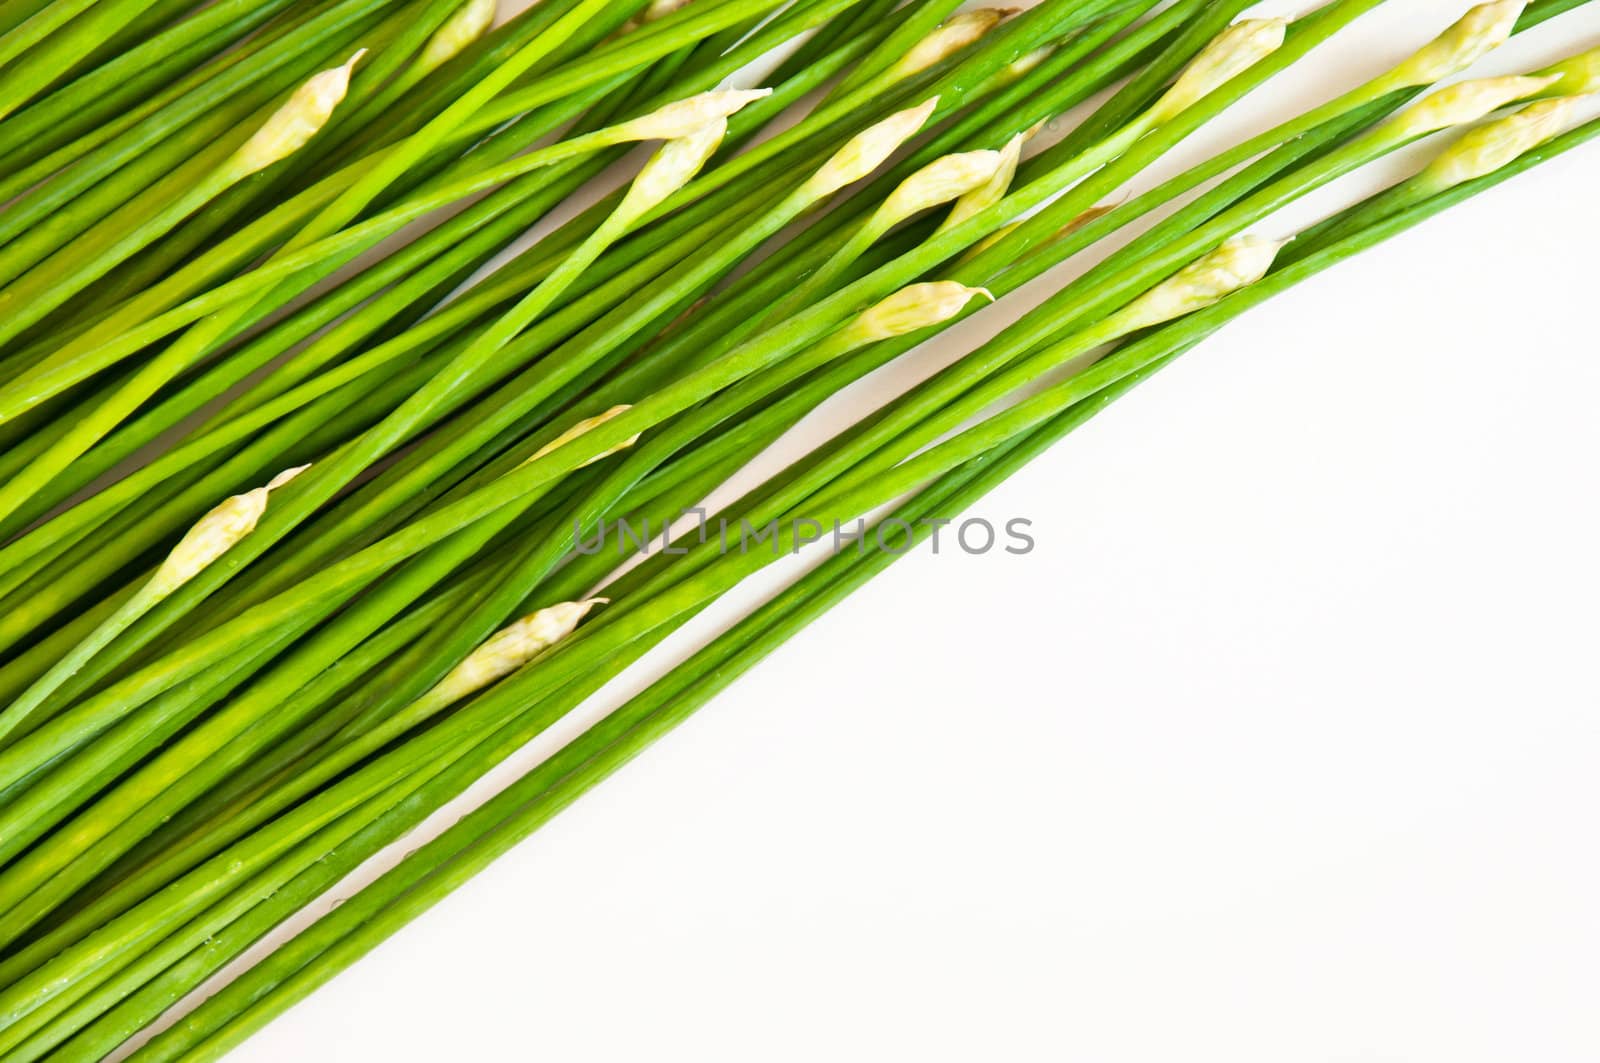 Chinese chive tilted on white background